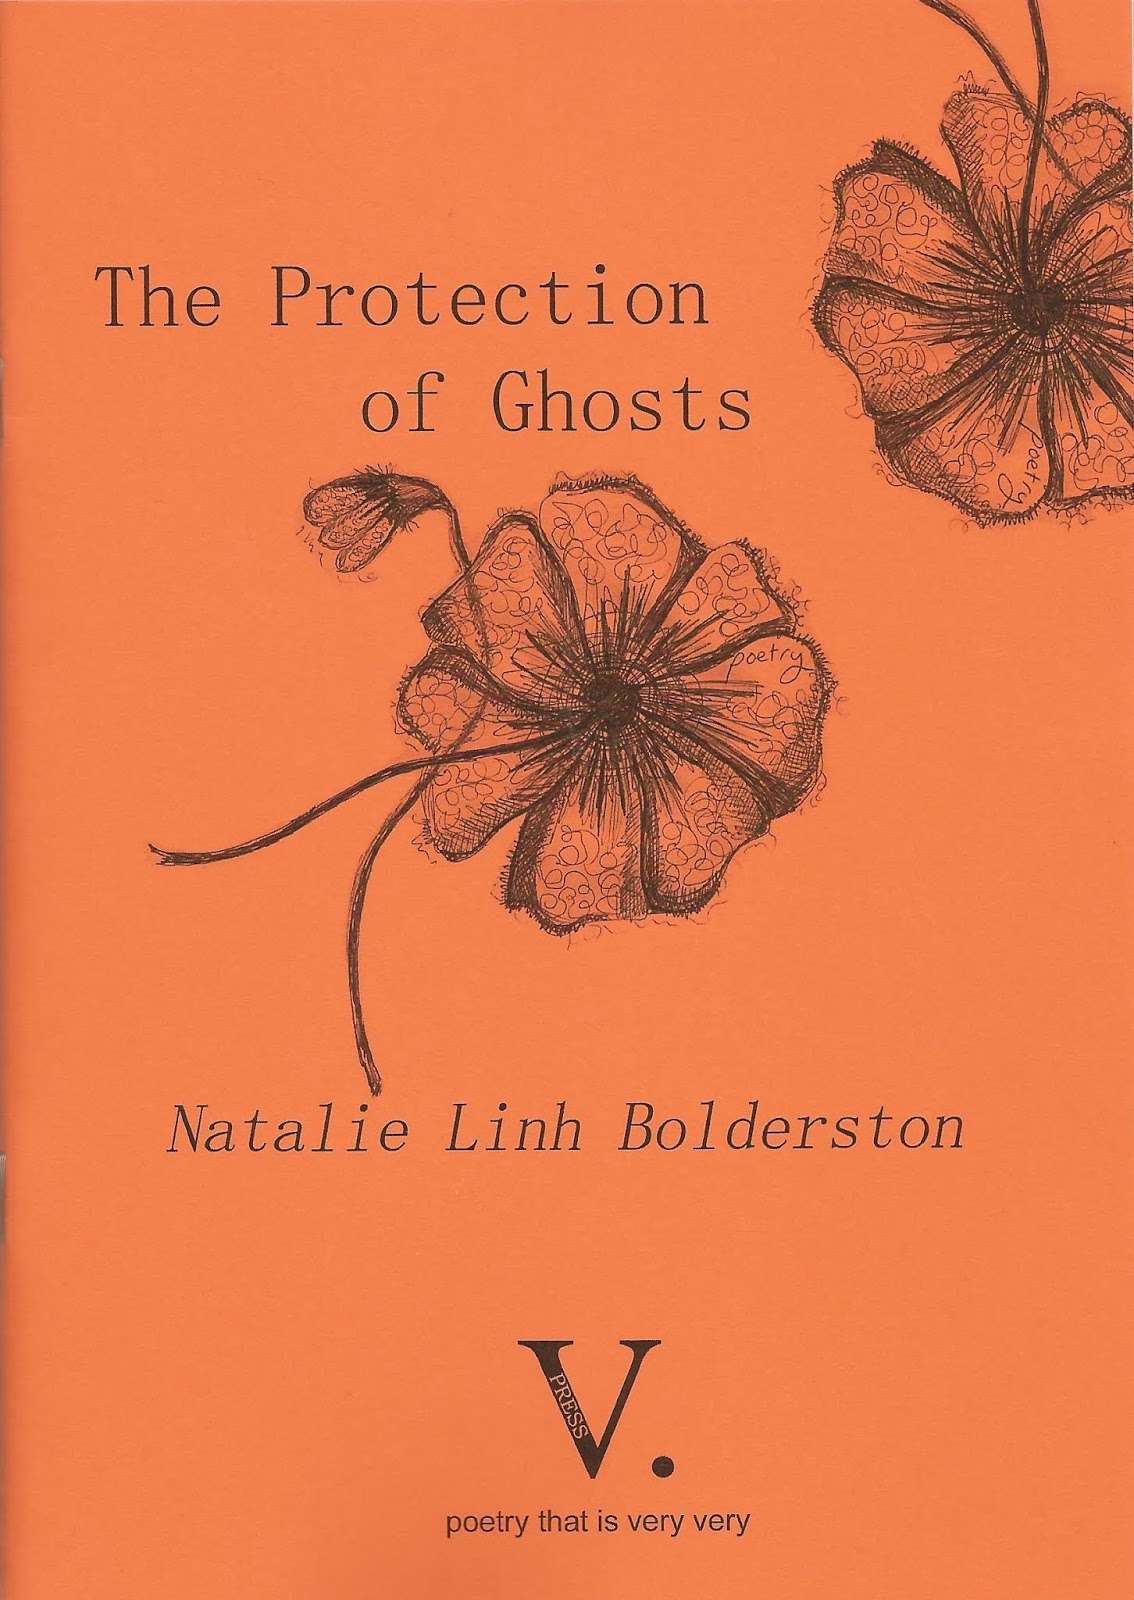 Natalie Linh Bolderston – The Protection of Ghosts